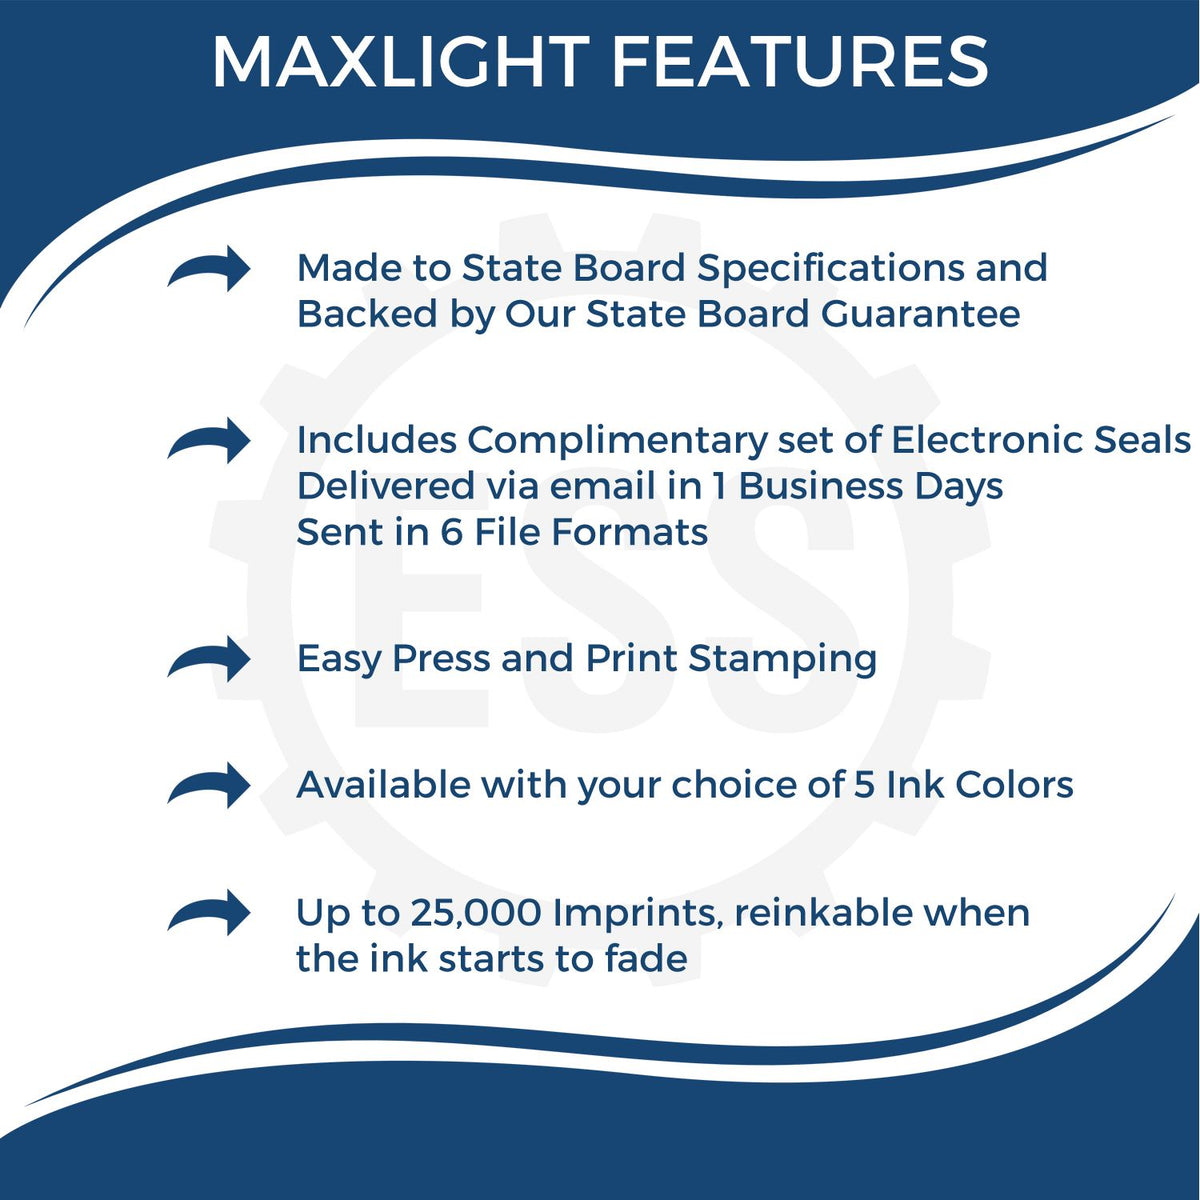 A picture of an infographic highlighting the selling points for the Premium MaxLight Pre-Inked Guam Landscape Architectural Stamp